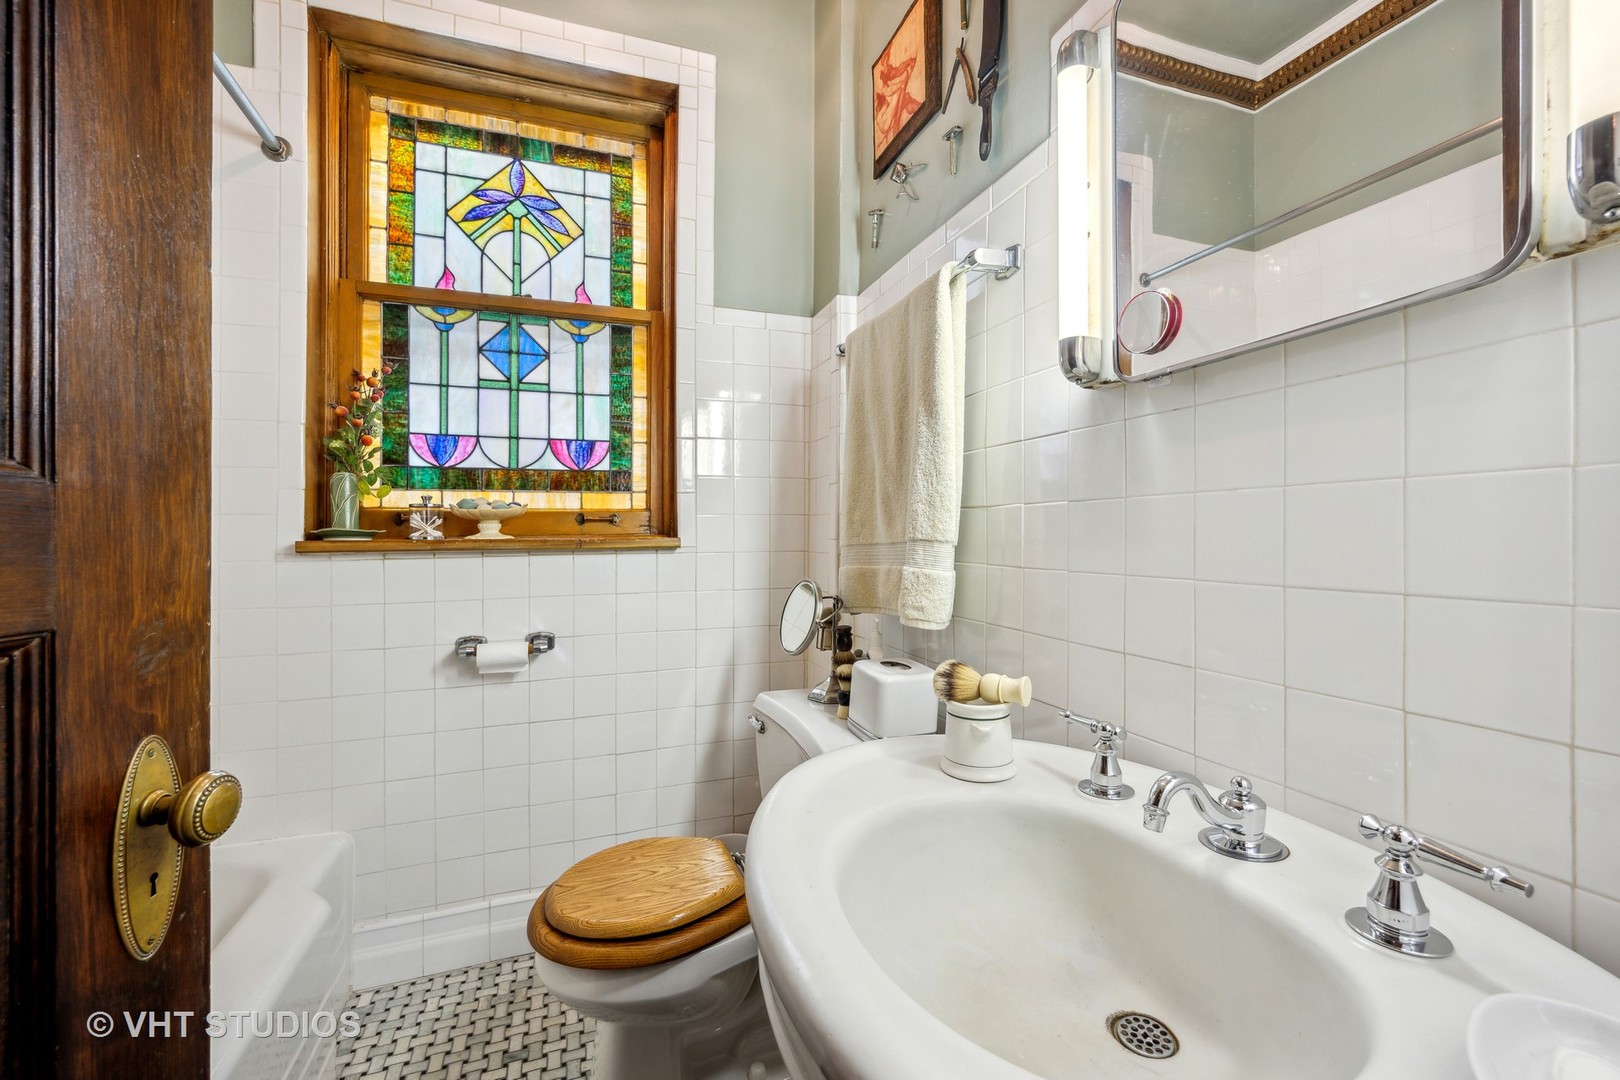 627 W Melrose Street, Chicago, Illinois, 60657, United States, 8 Bedrooms Bedrooms, ,8 BathroomsBathrooms,Residential,For Sale,627 W Melrose Street,1474120